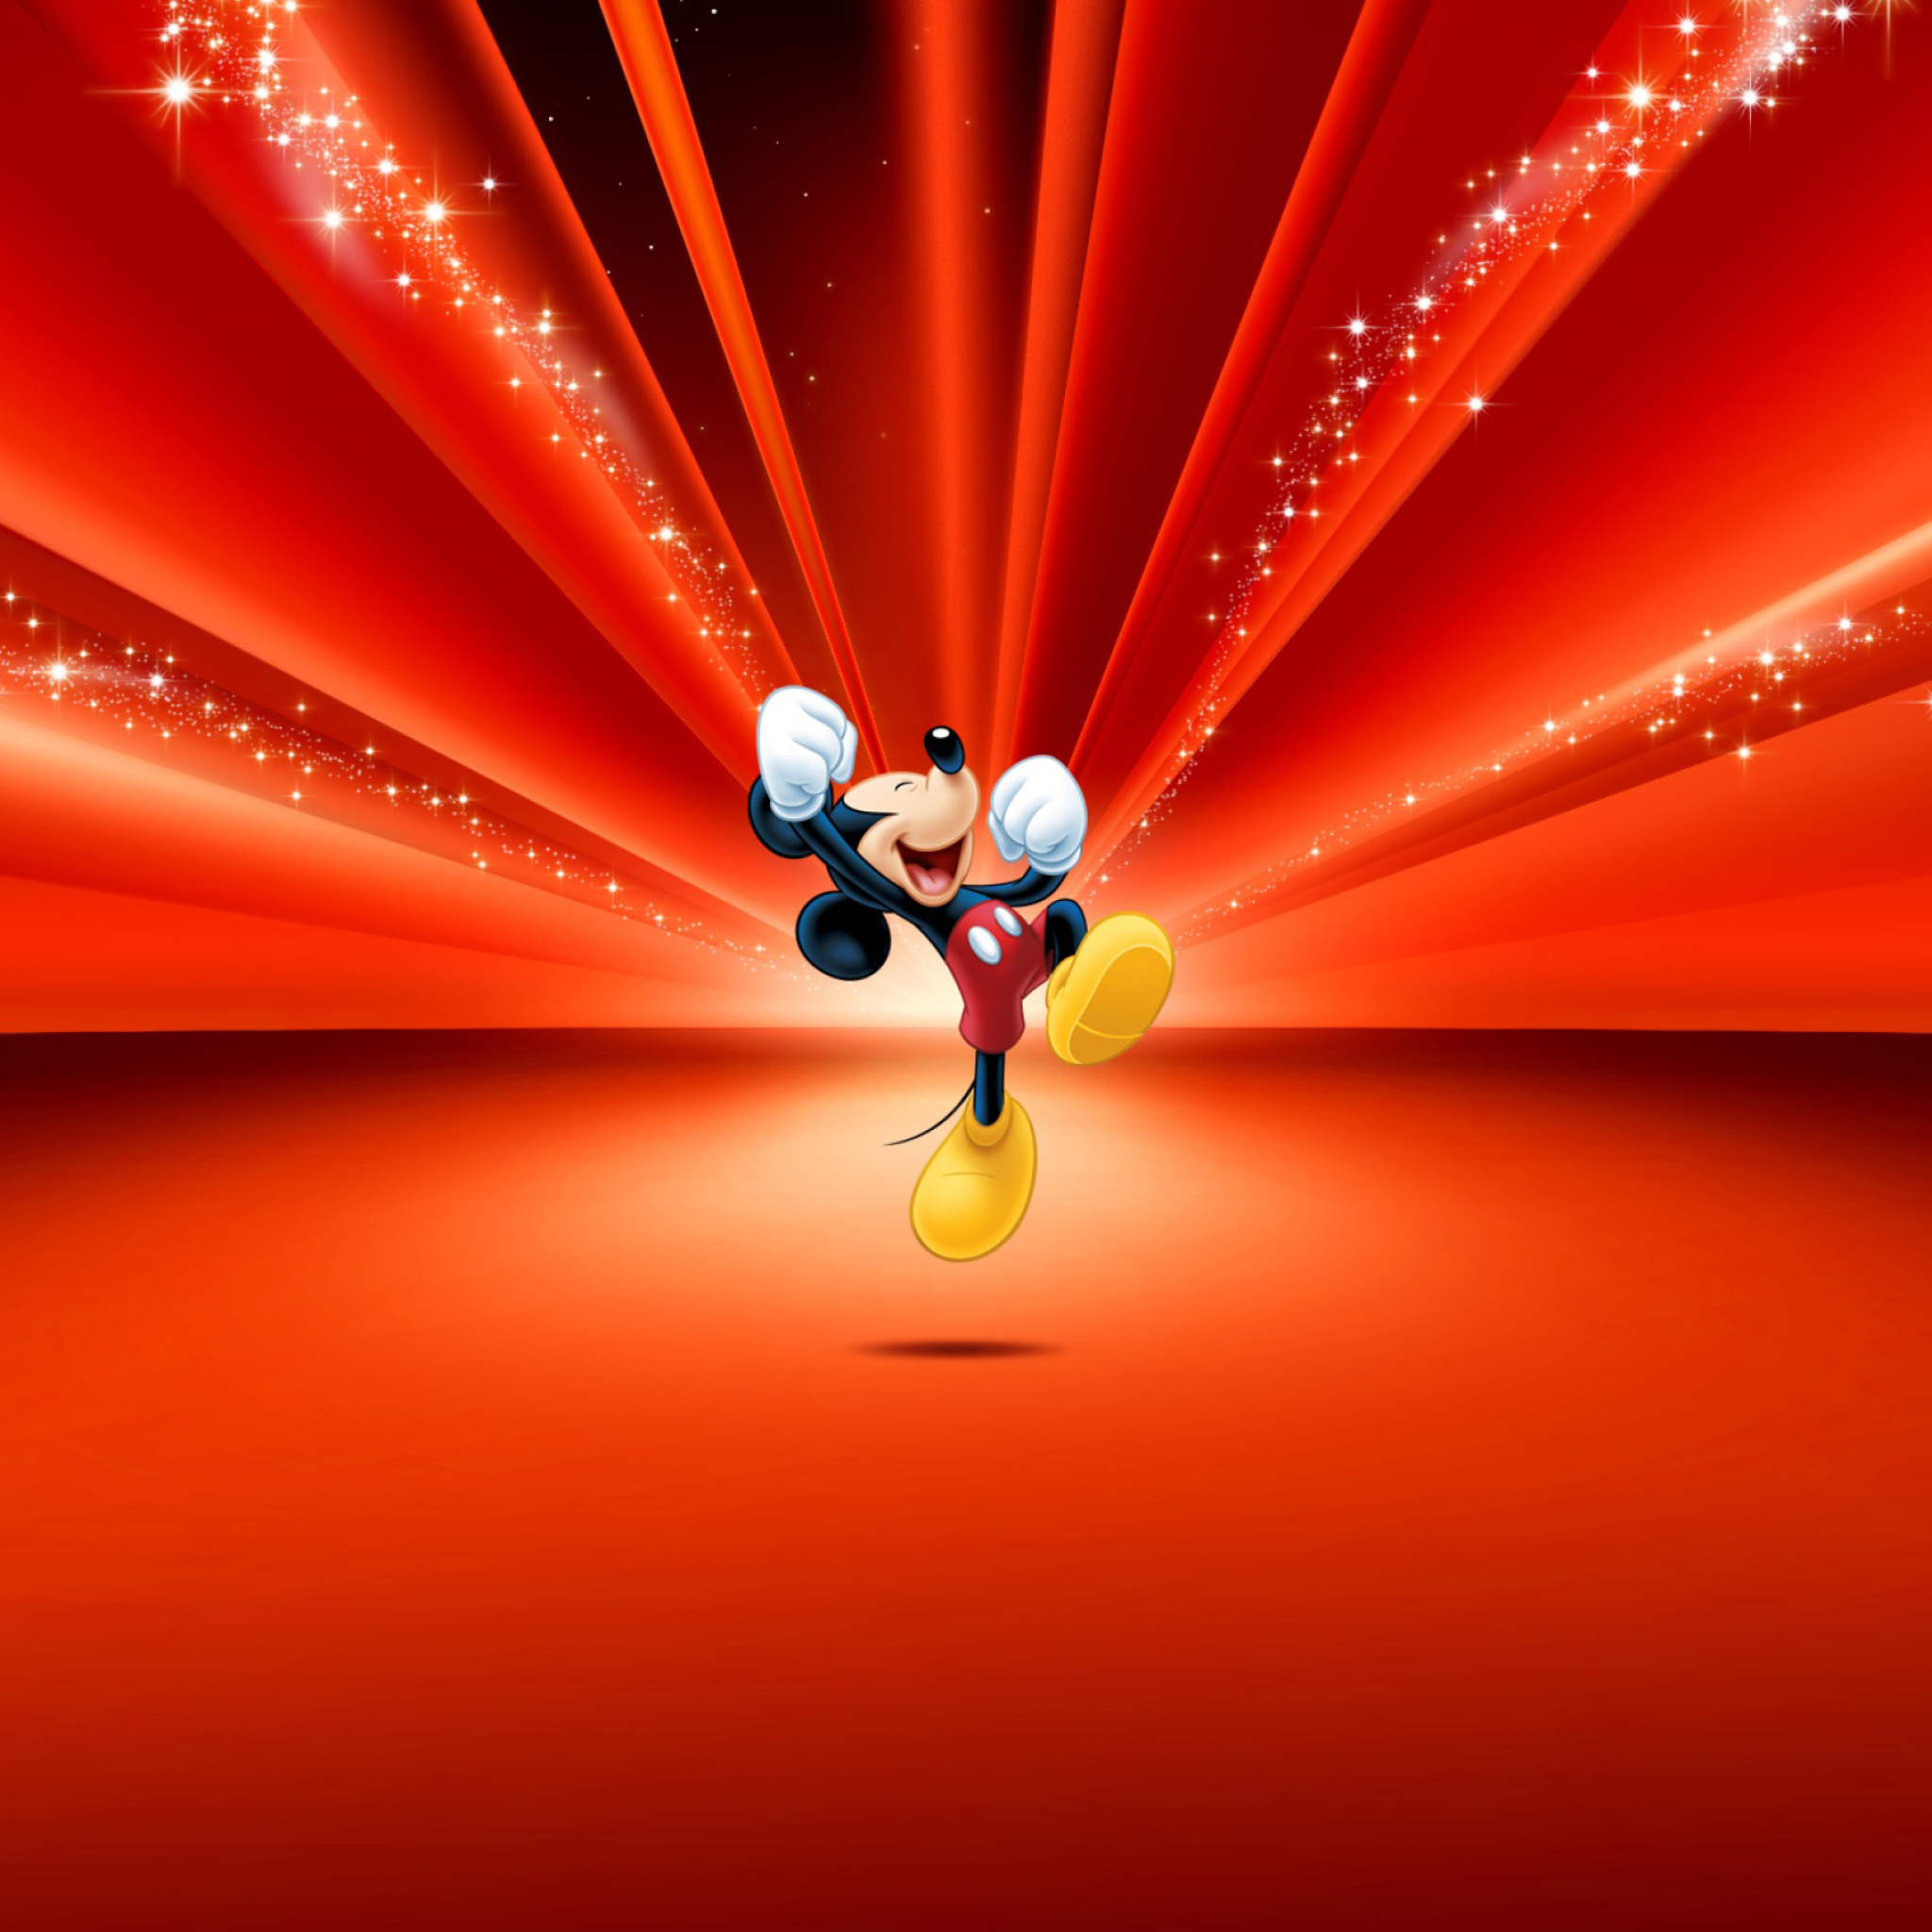 Mickey Mouse Disney Red Wallpaper Wallpaper For Ipad Mini 2